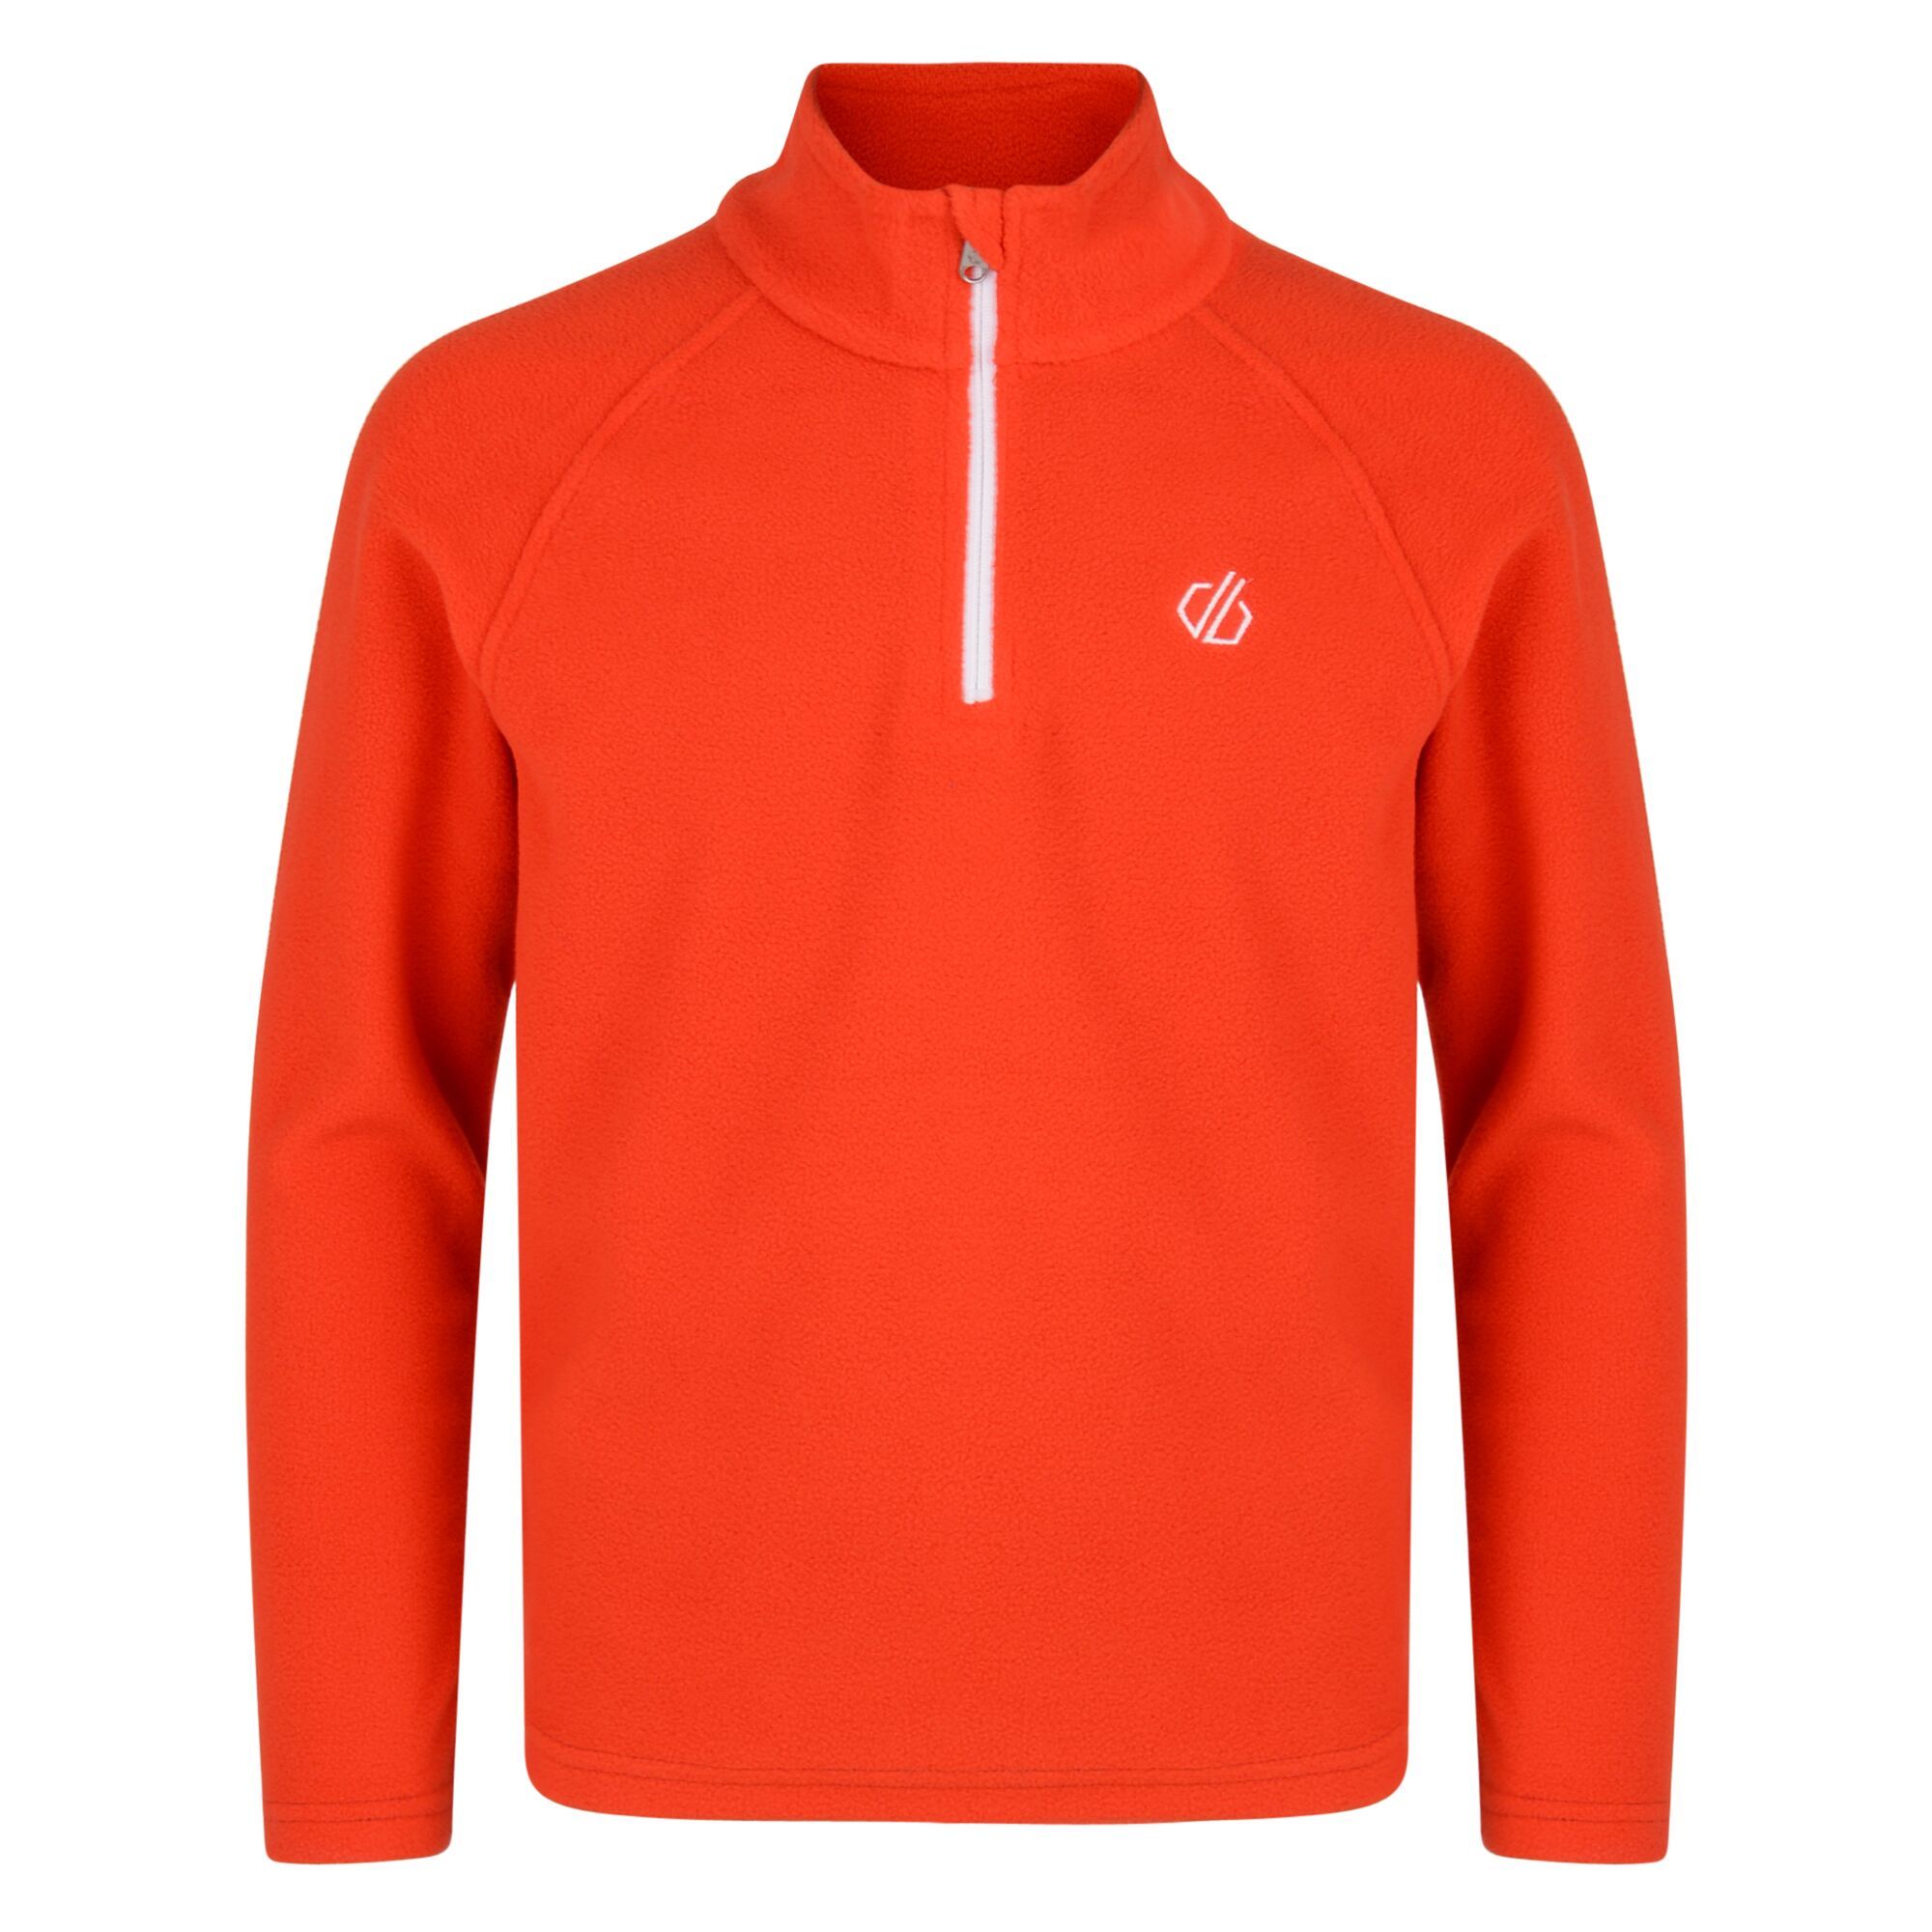 100% polyester fleece, 1 side brushed and 1 side anti pill (170gsm). Half length zip with inner zip and chin guard.